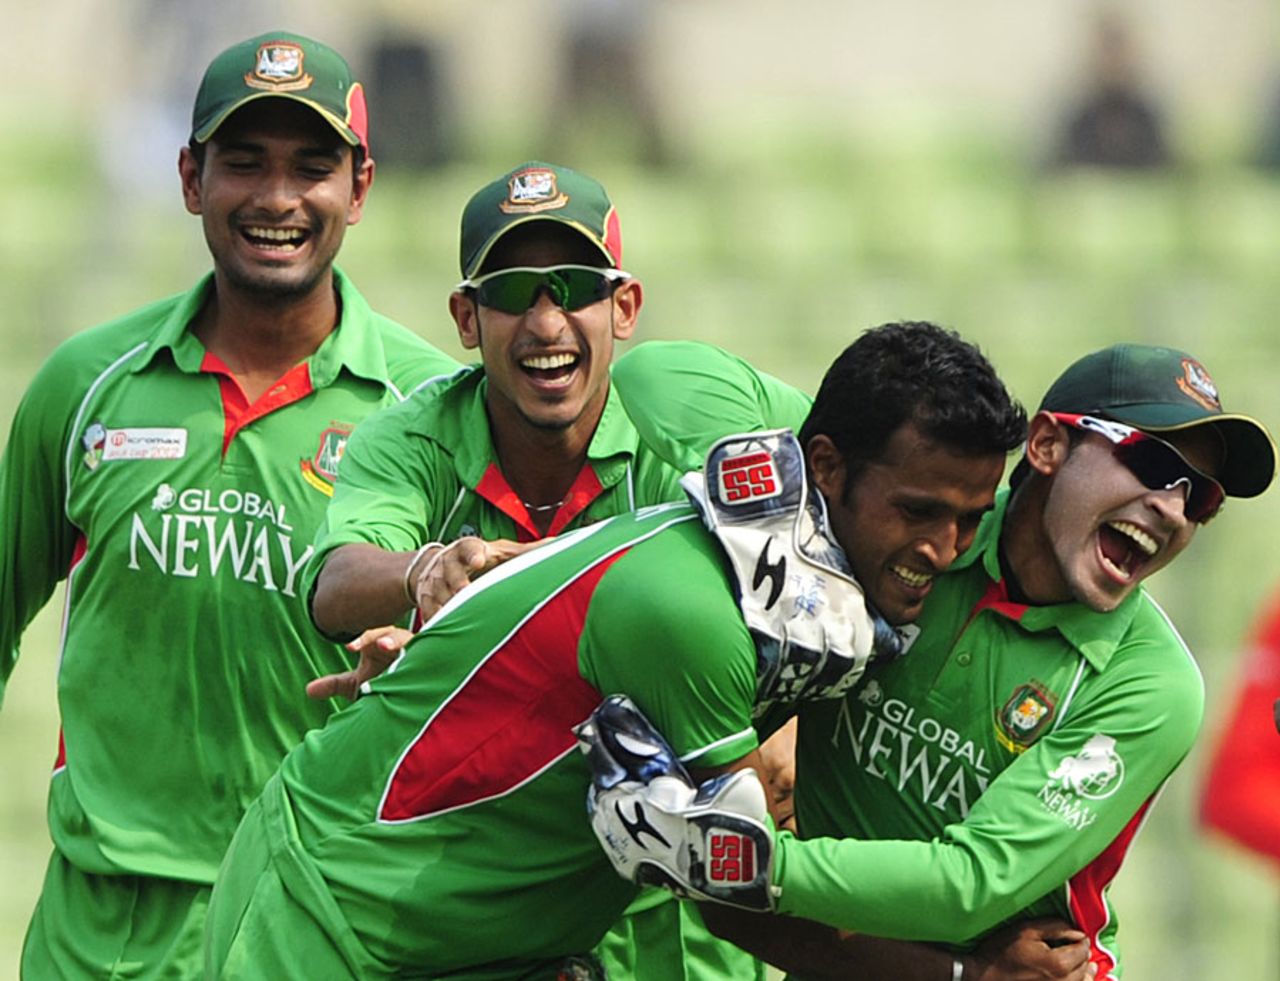 Mushfiqur Rahim is delighted with Nazmul Hossain for picking up a wicket, Bangladesh v Sri Lanka, Asia Cup, Mirpur, March 20, 2012